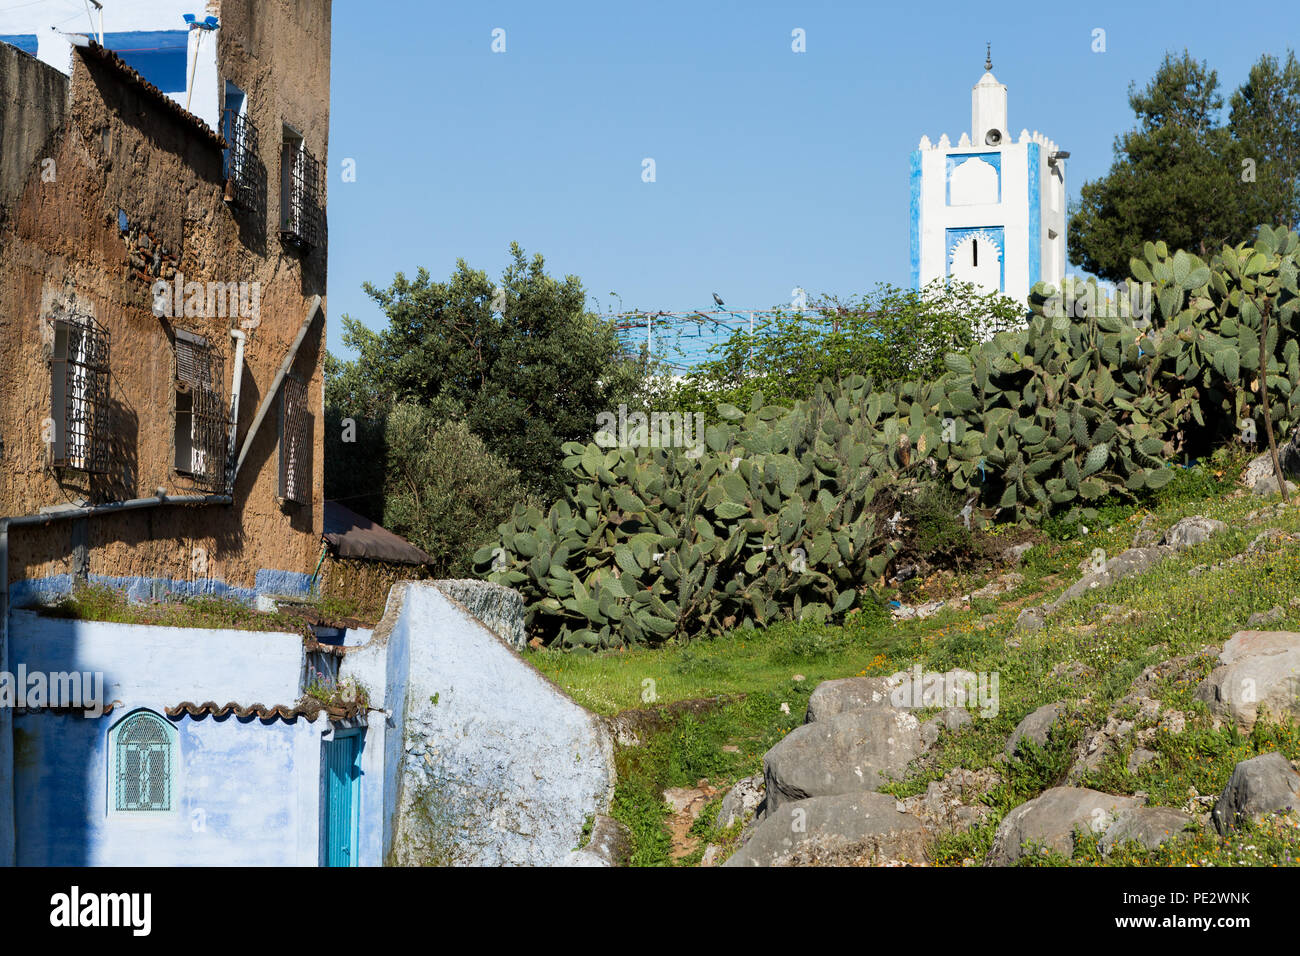 Chefchaouen (Chaouen) is a city in Morocco noted for its buildings in shades of blue. Stock Photo